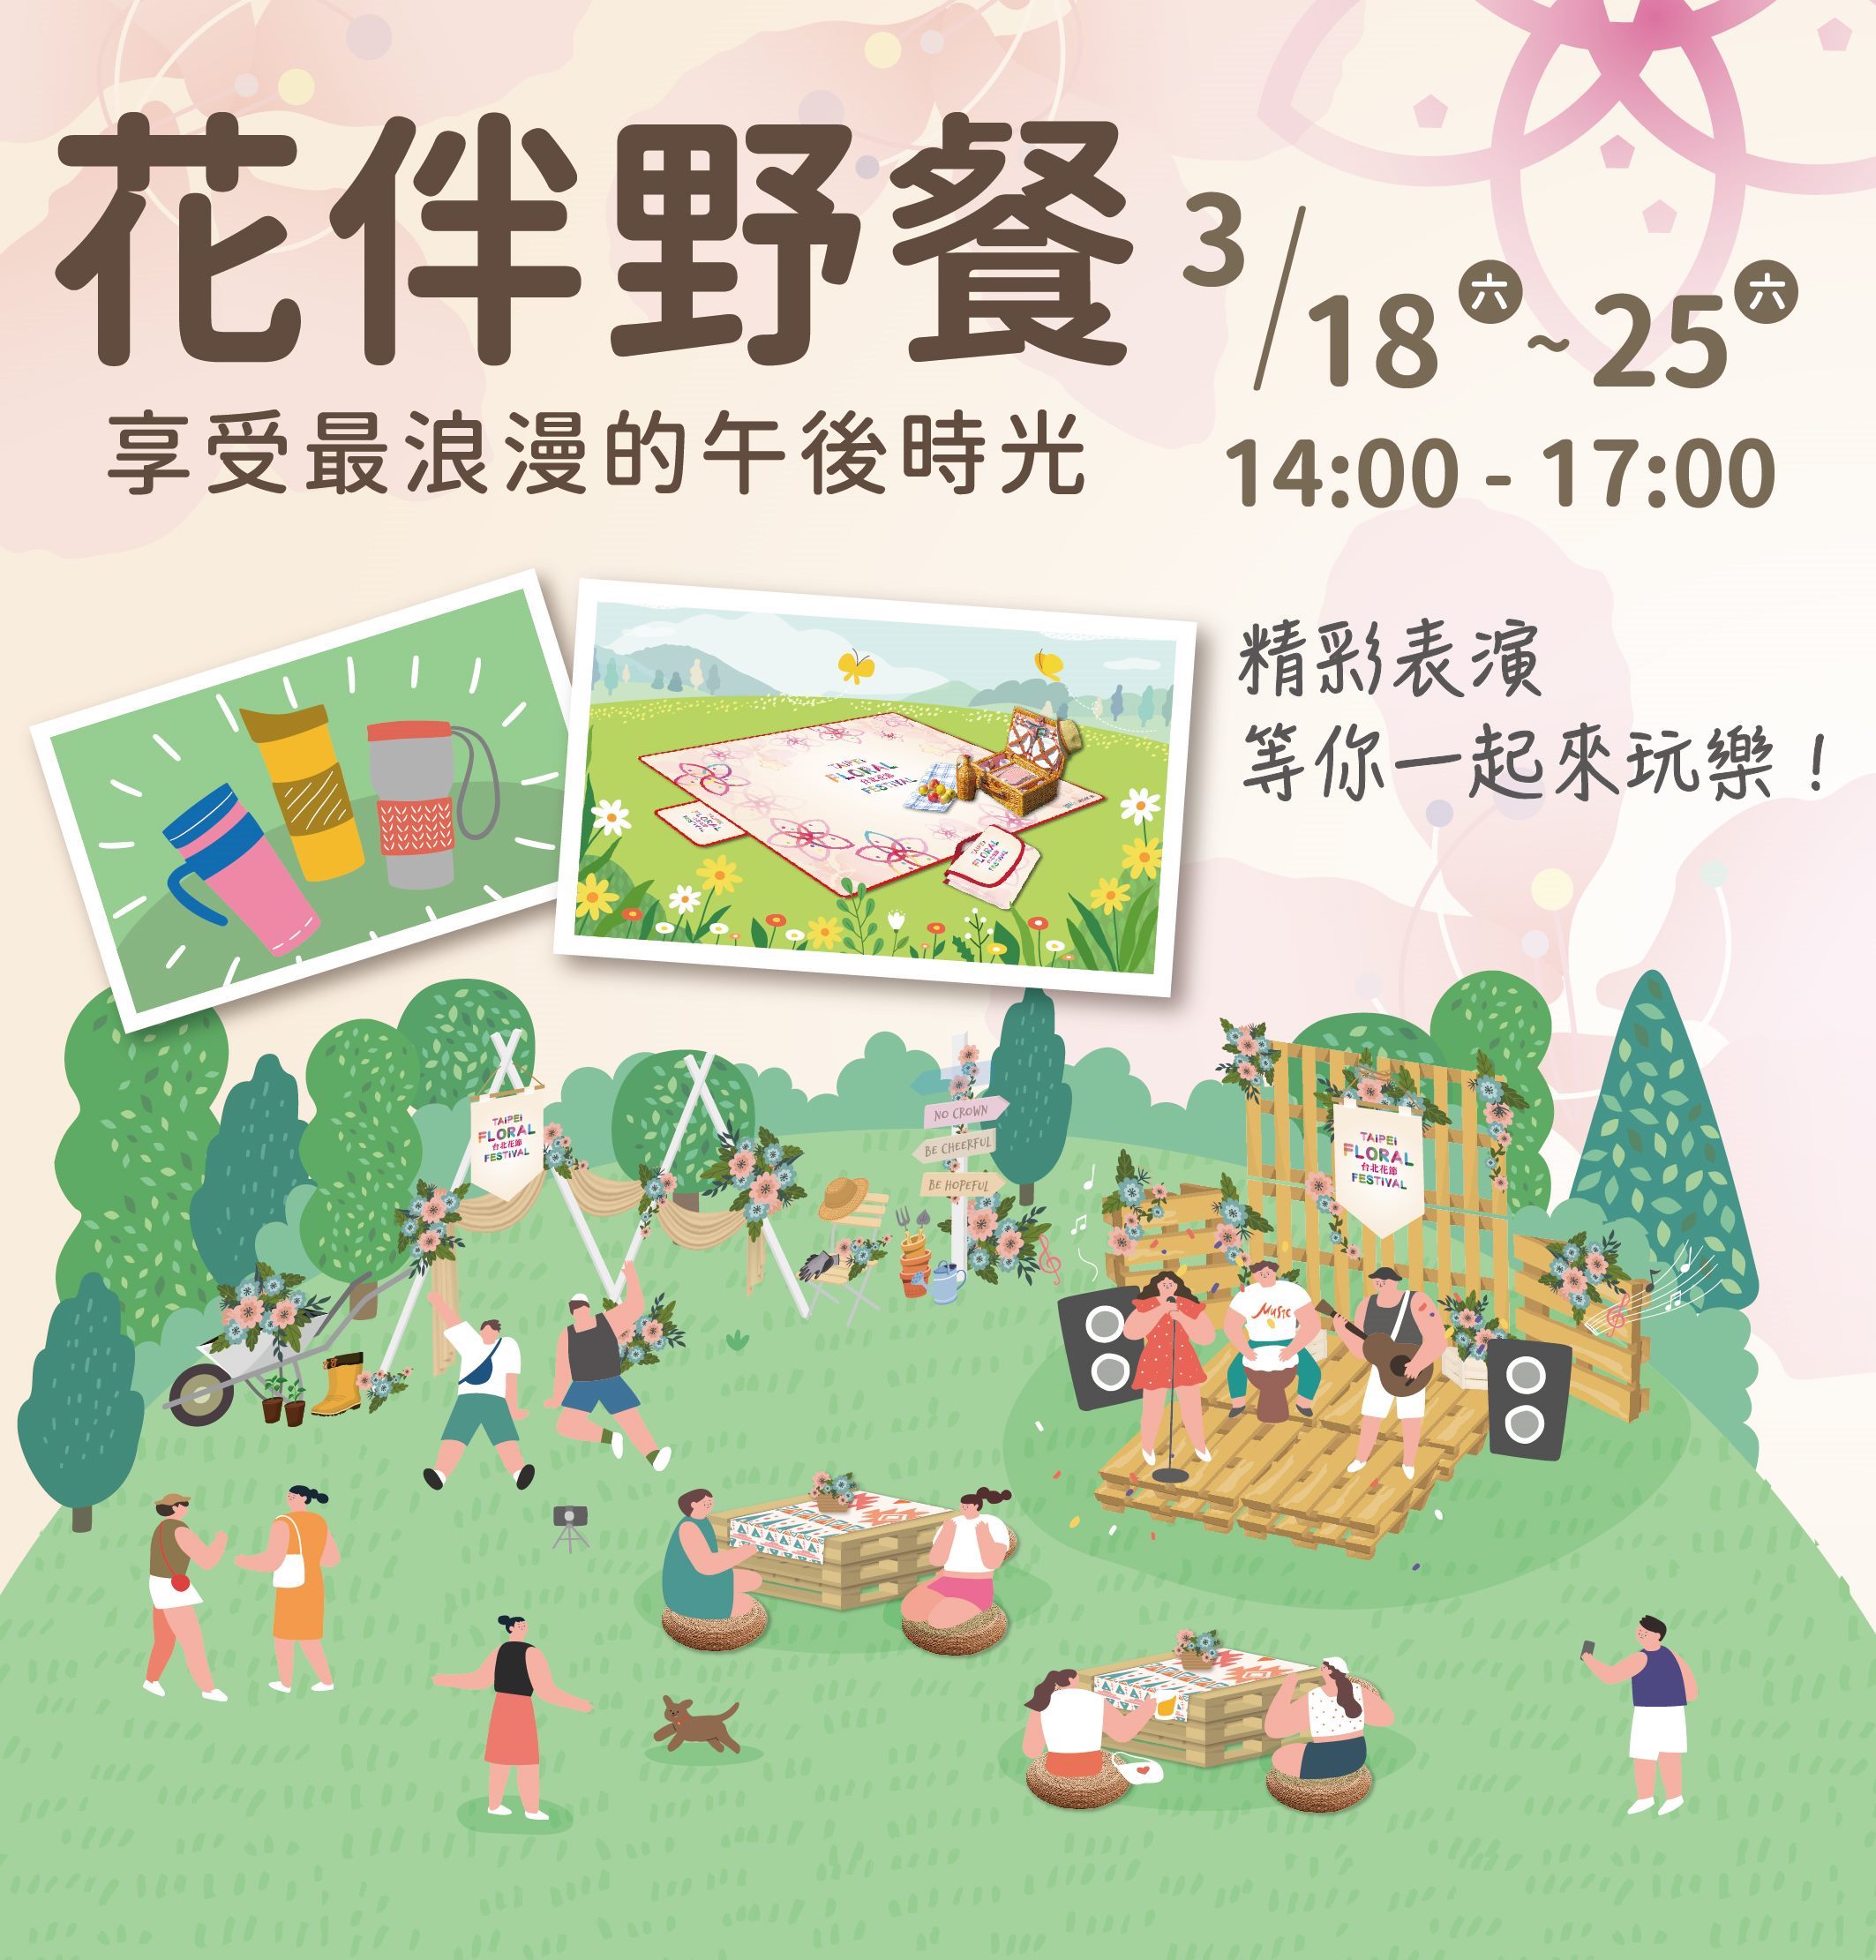 Poster of the Taipei Floral Festival Floral Picnic